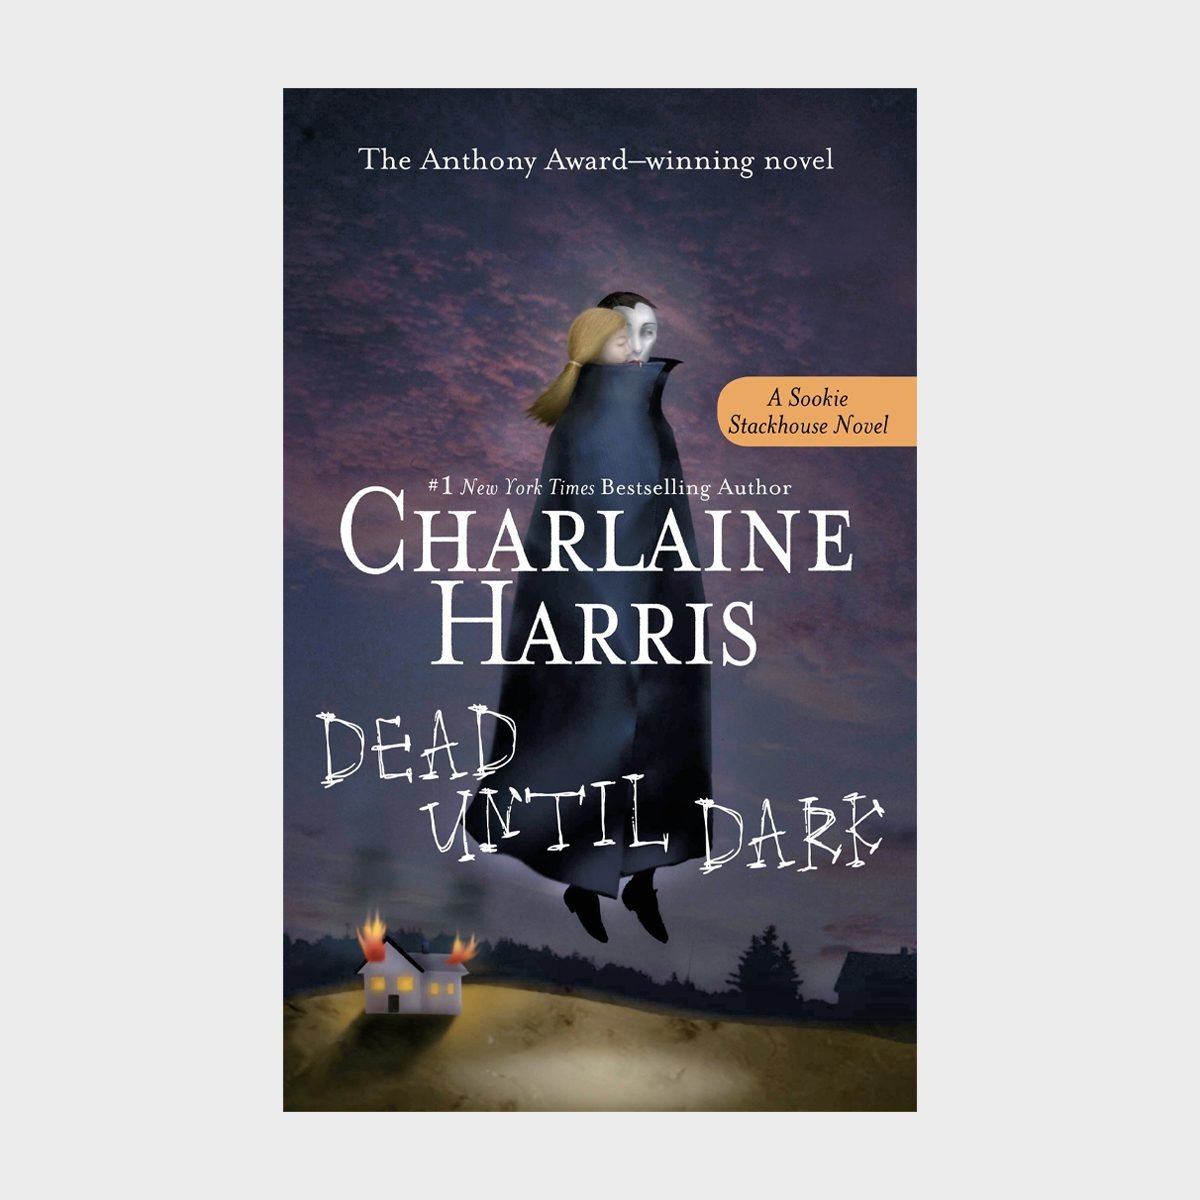 <p class=""><strong>Series starter: </strong><a href="https://www.amazon.com/Dead-Until-Sookie-Stackhouse-Blood/dp/0441008534/" rel="noopener noreferrer"><em>Dead Until Dark</em></a></p> <p class=""><strong>What you're in for: </strong>Immortal vampires and high stakes</p> <p>You might recognize this paranormal romance book series by its TV adaptation name: <em>True Blood</em>. The first in the 13-book series was published in 2001, giving readers romance with a little bite. (Yep, it's a <a href="https://www.rd.com/list/vampire-books/" rel="noopener noreferrer">vampire book</a>.) The books are set in a small town in Louisiana, where Sookie Stackhouse is a cocktail waitress living a totally normal life—until she meets and falls for a vampire.</p> <p class="listicle-page__cta-button-shop"><a class="shop-btn" href="https://www.amazon.com/Dead-Until-Sookie-Stackhouse-Blood/dp/0441008534/">Shop Now</a></p>